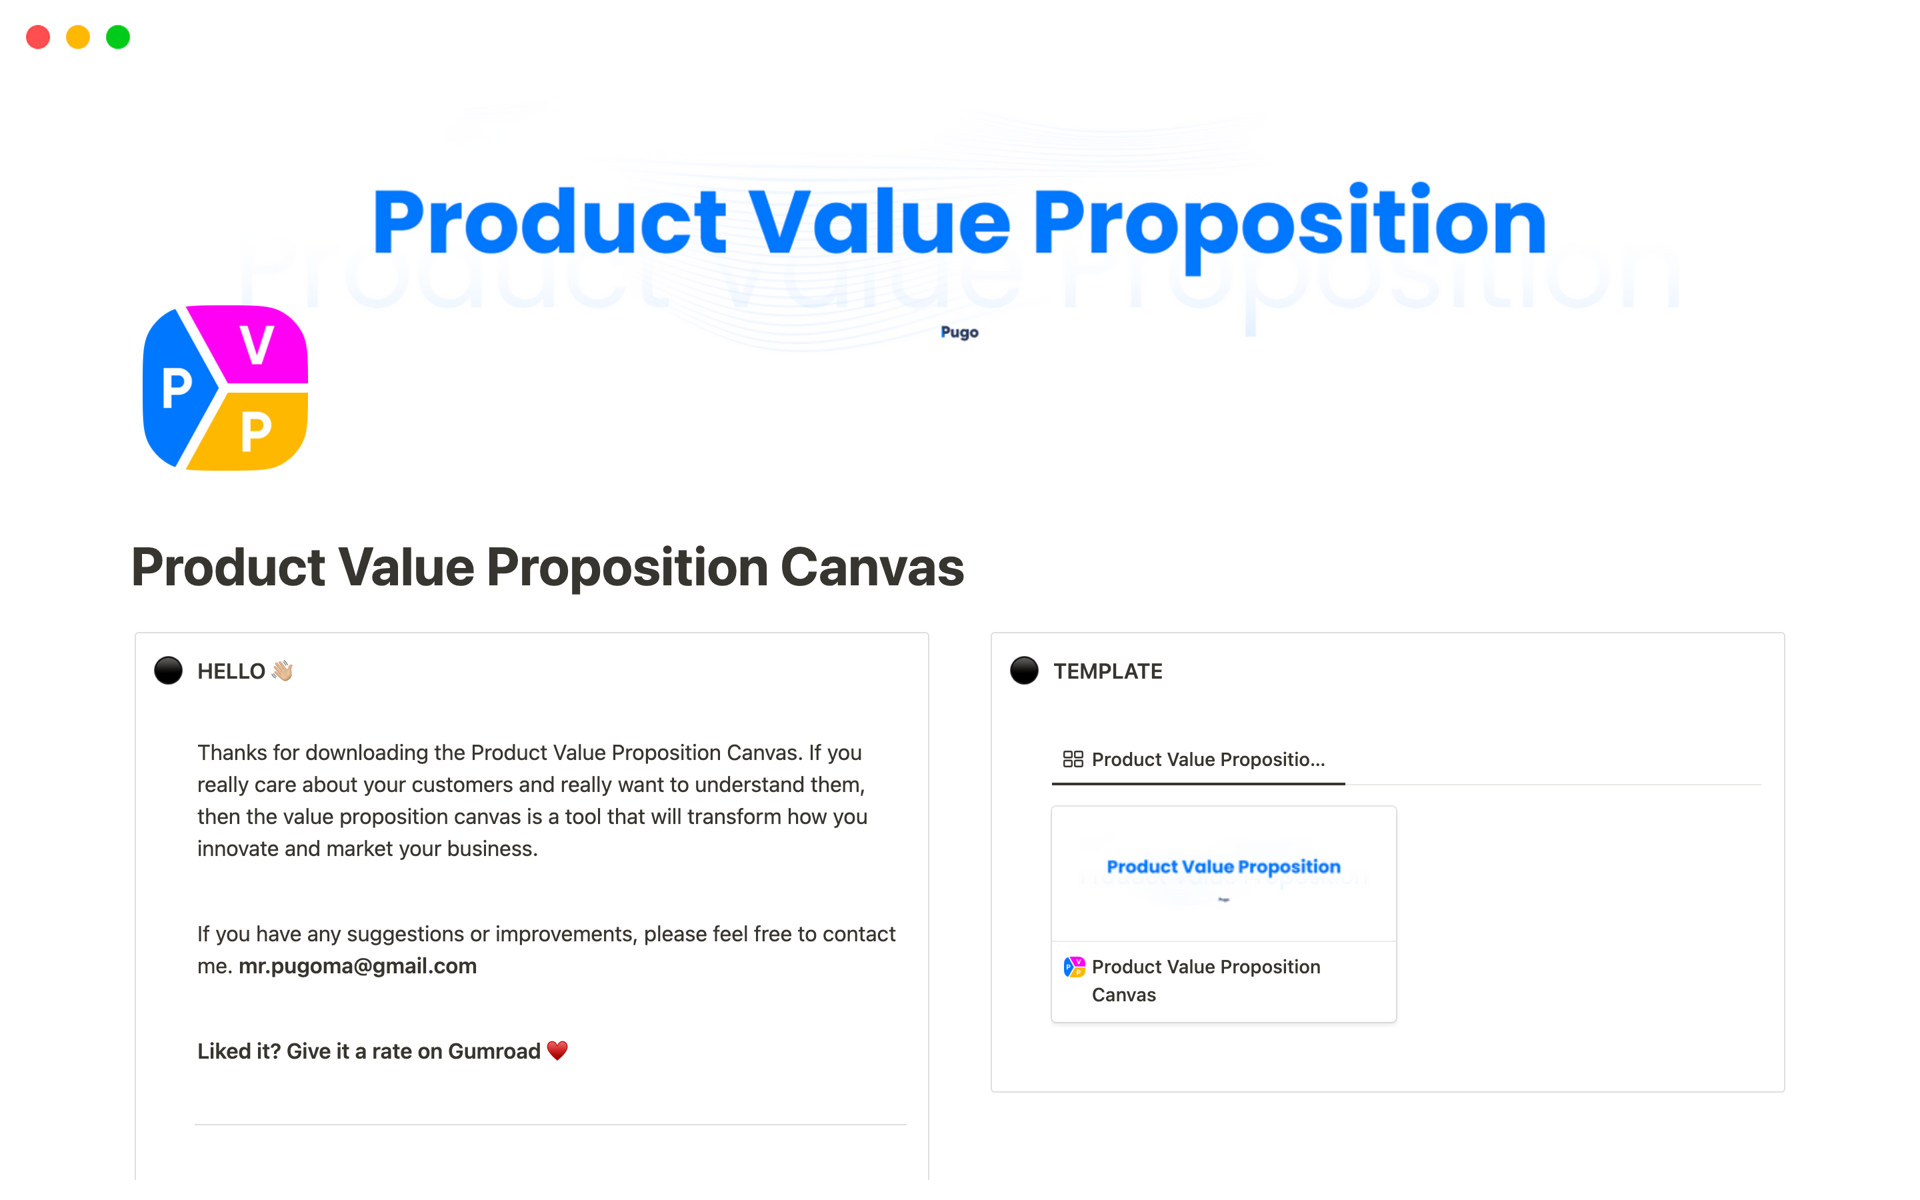 If you really care about your customers and really want to understand them, then the value proposition canvas is a tool that will transform how you innovate and market your business.